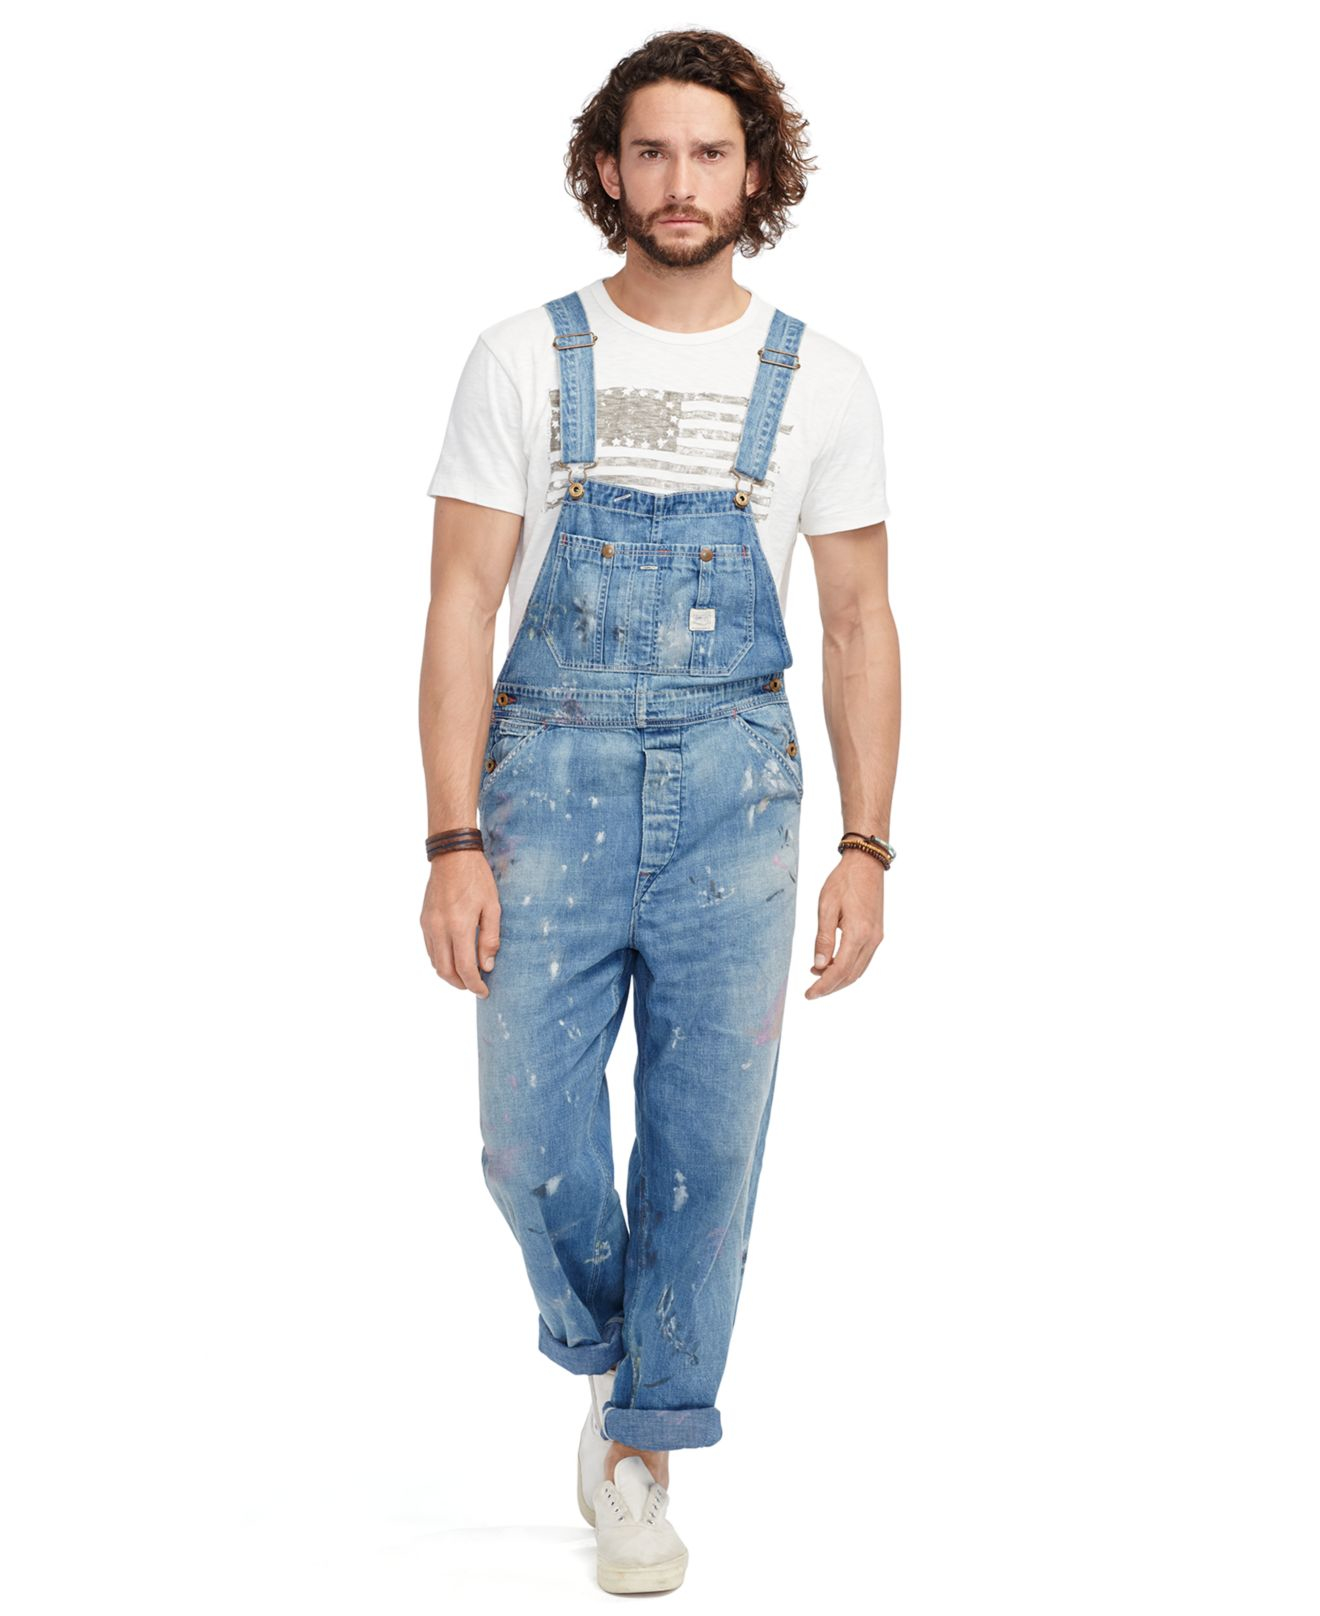 List 102+ Pictures Denim Front Pocket Sexc Overalls W/o Tee Completed